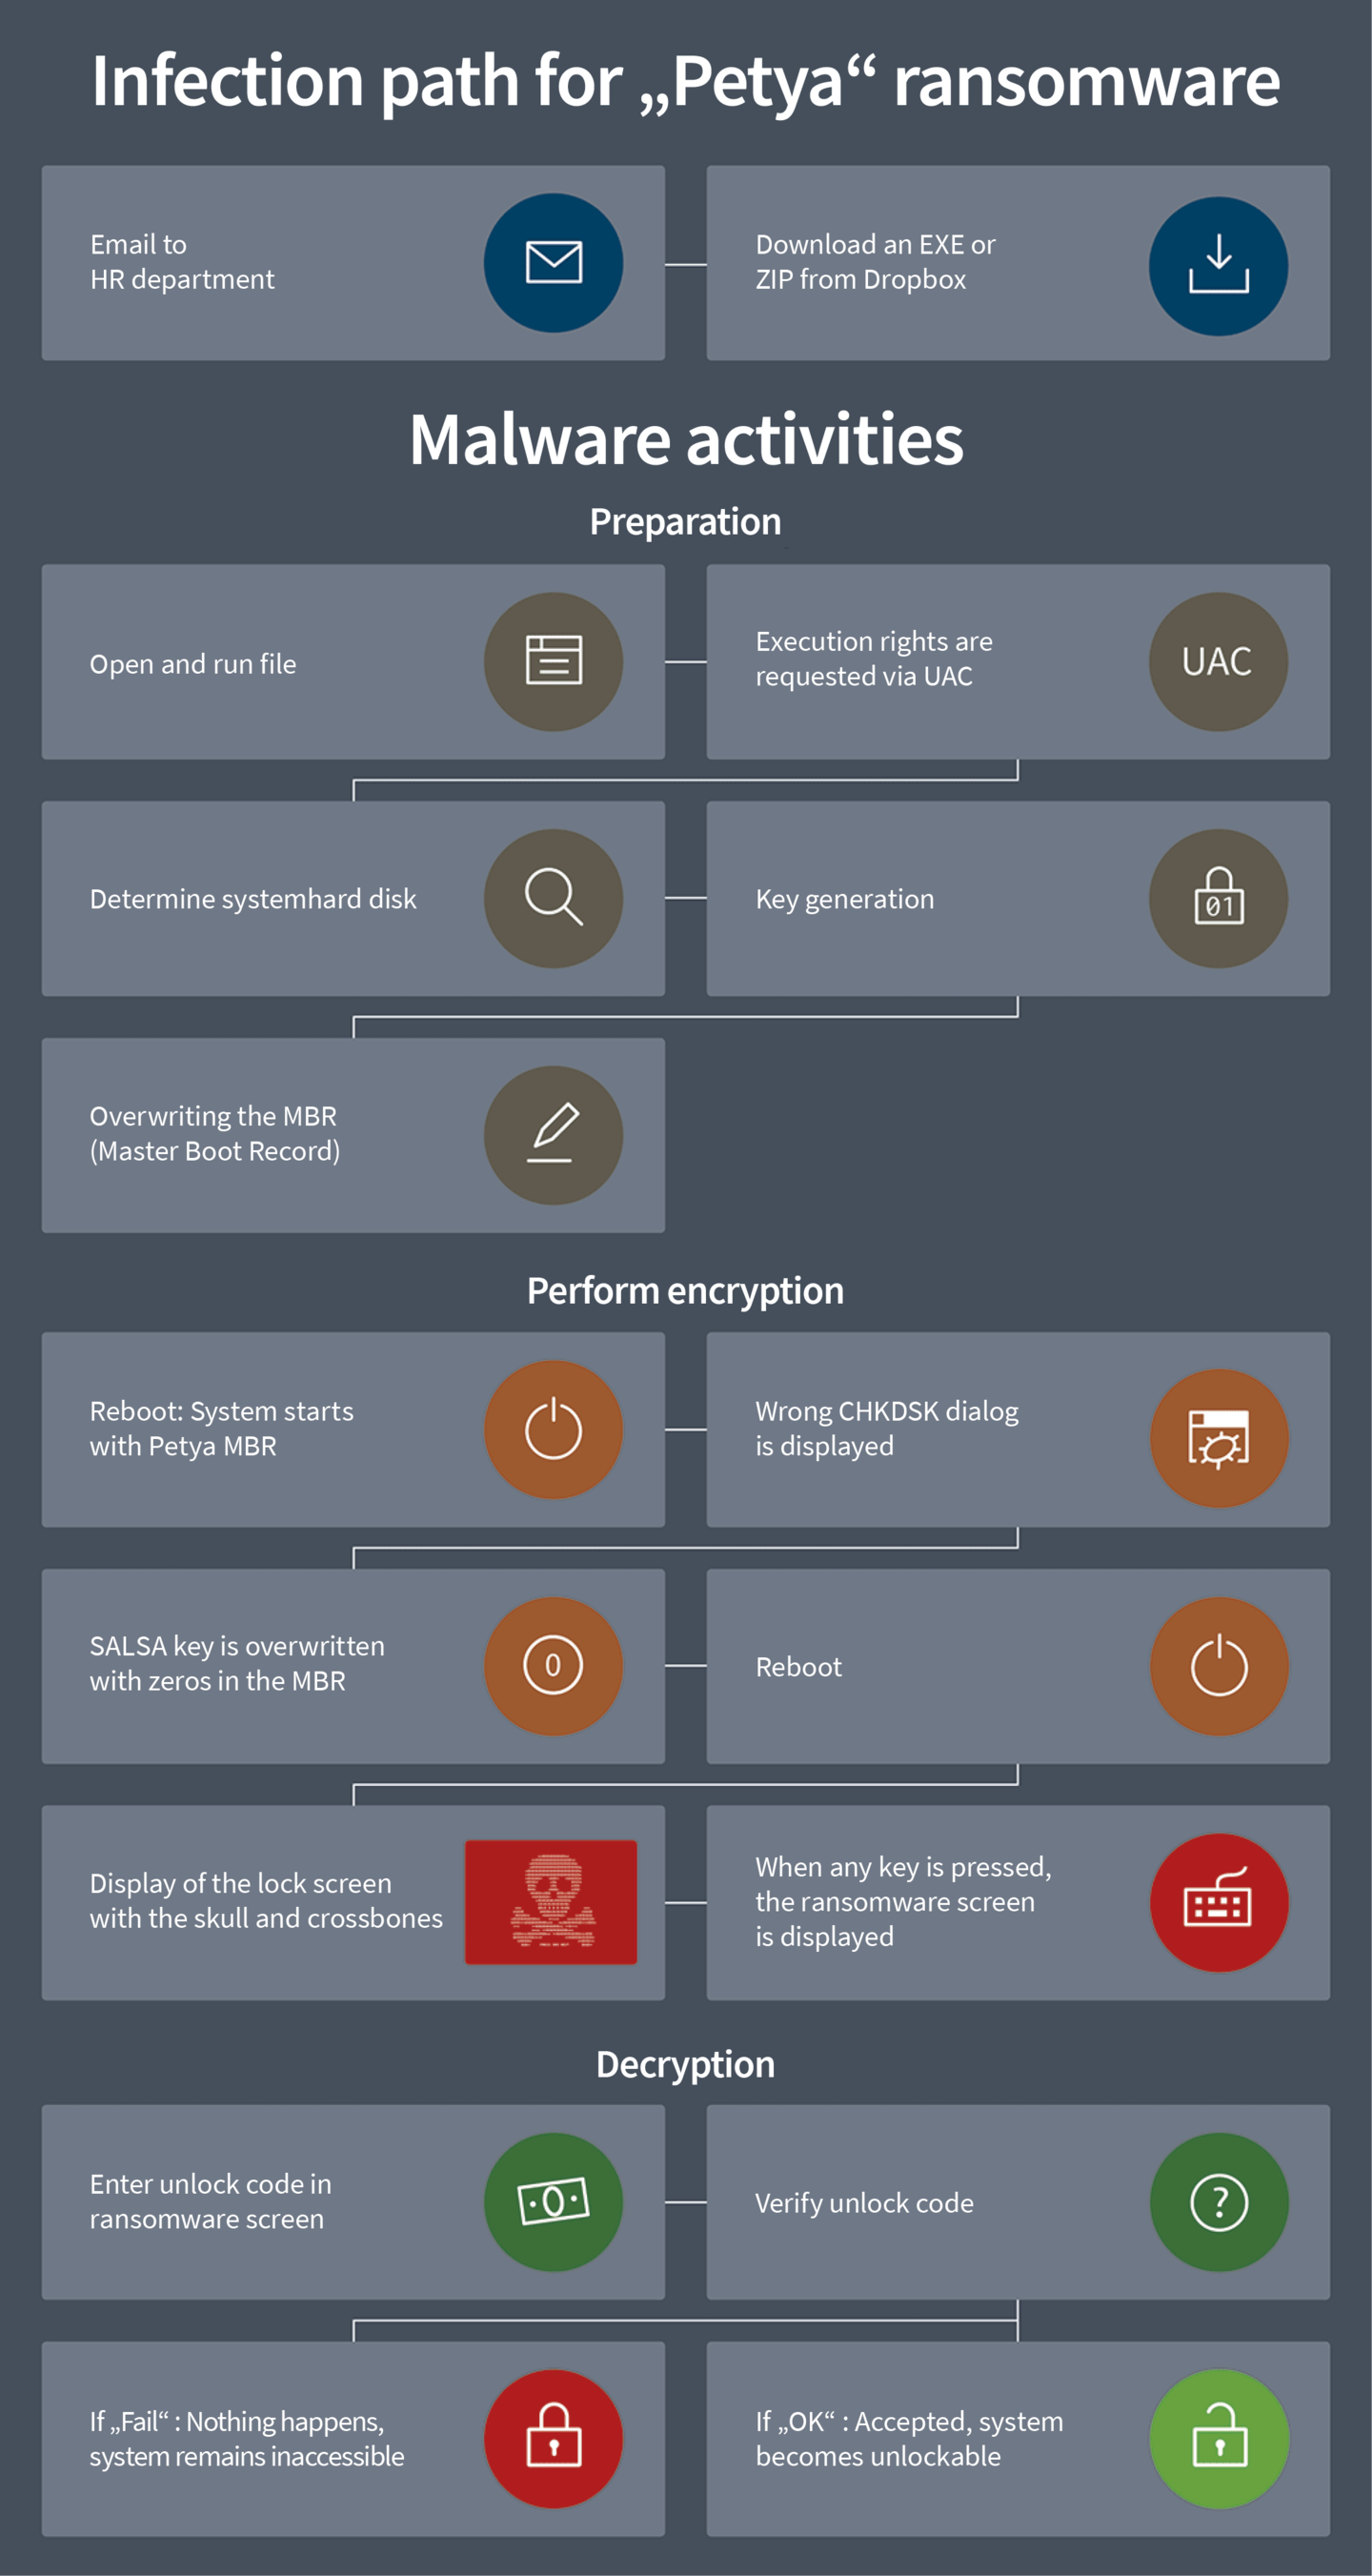 Inforgraphic showing the infection path for "Petya" ransomware